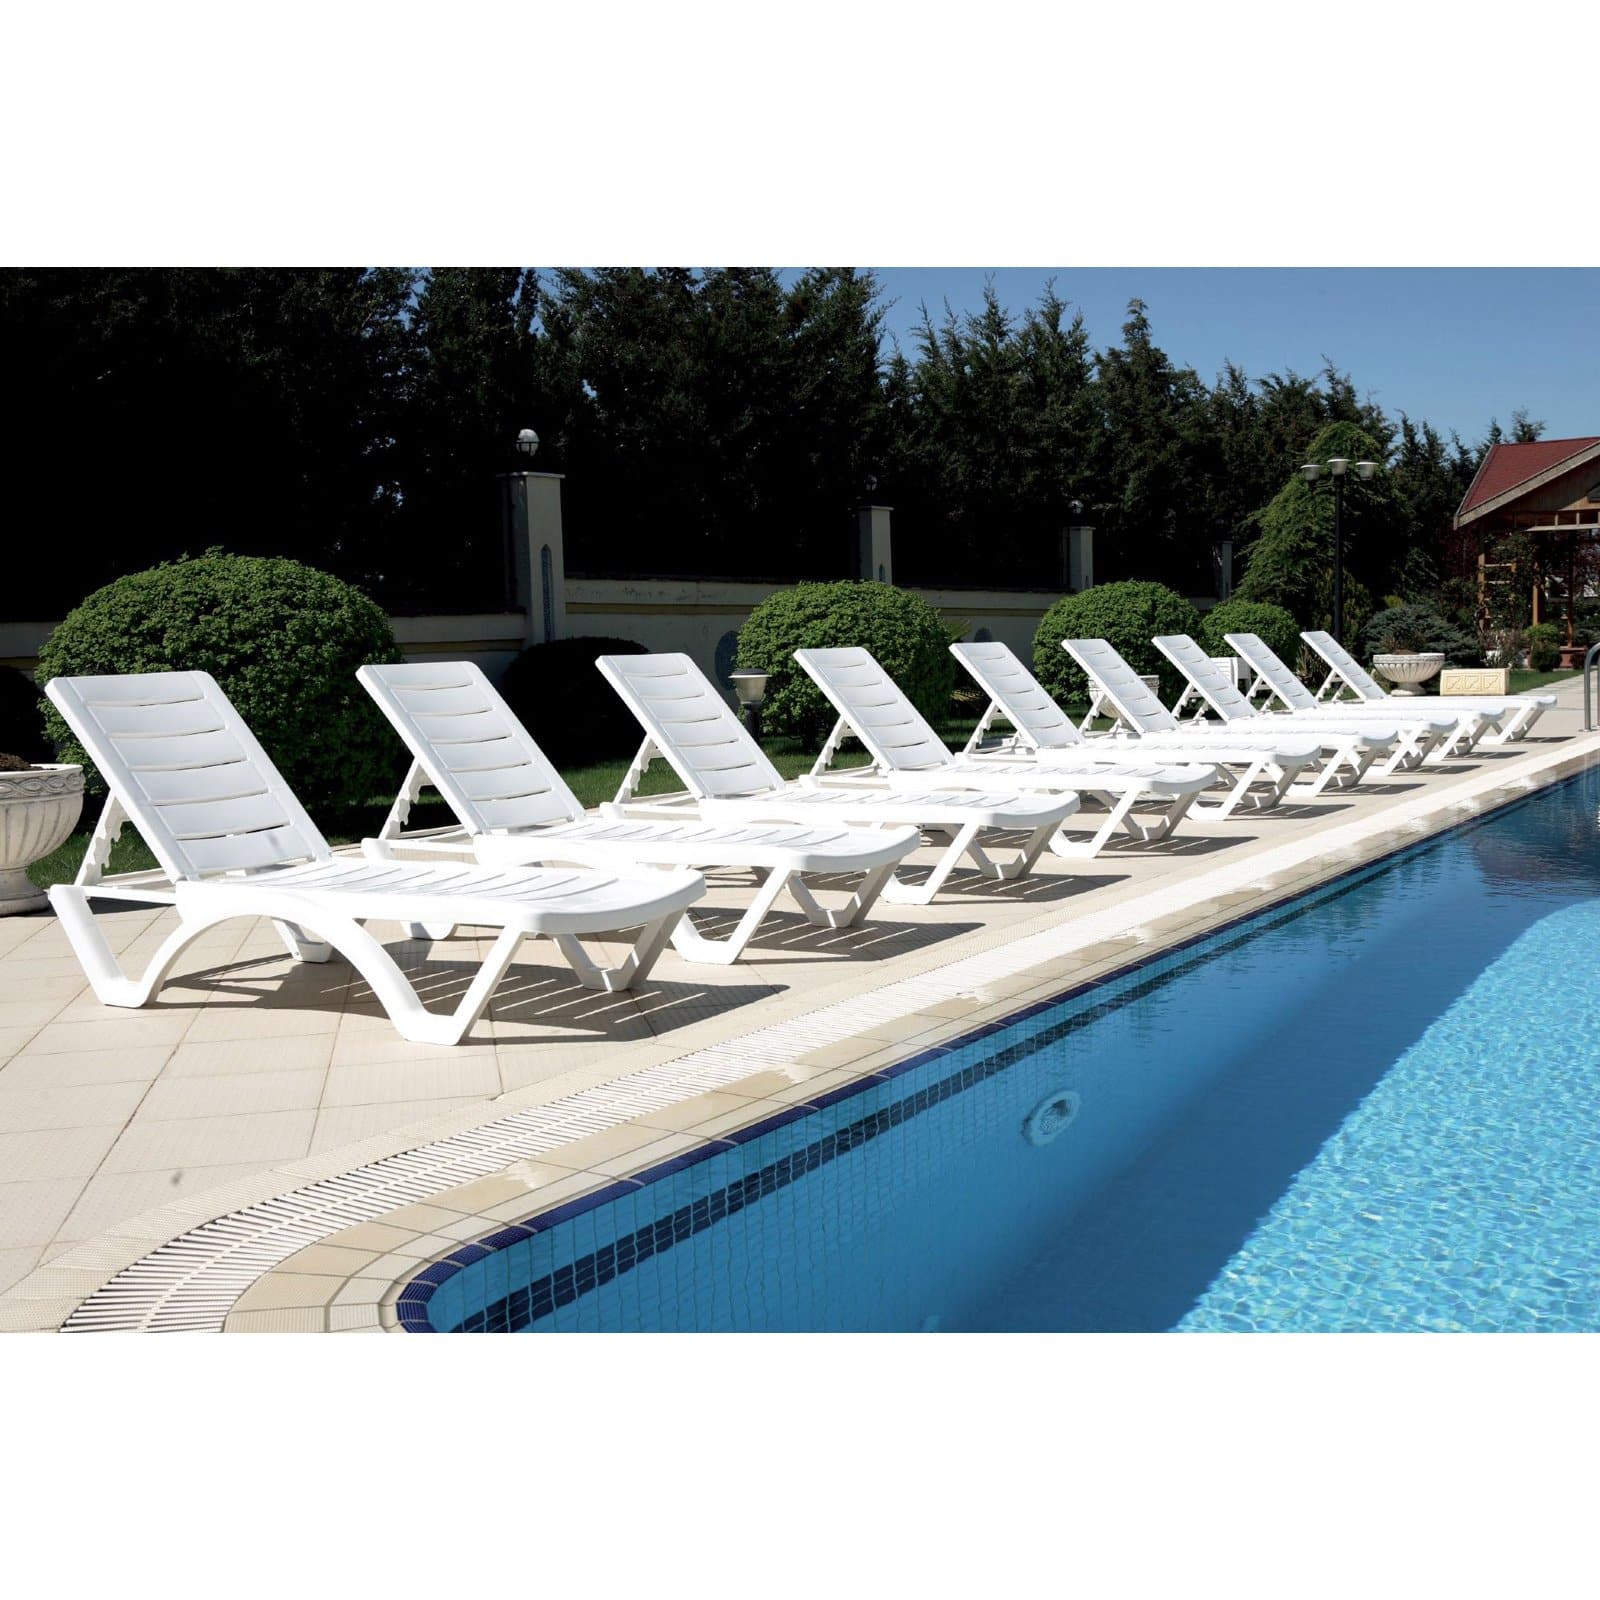 Compamia Aqua Modern Resin Pool Chaise Lounge in White Finish - image 5 of 9